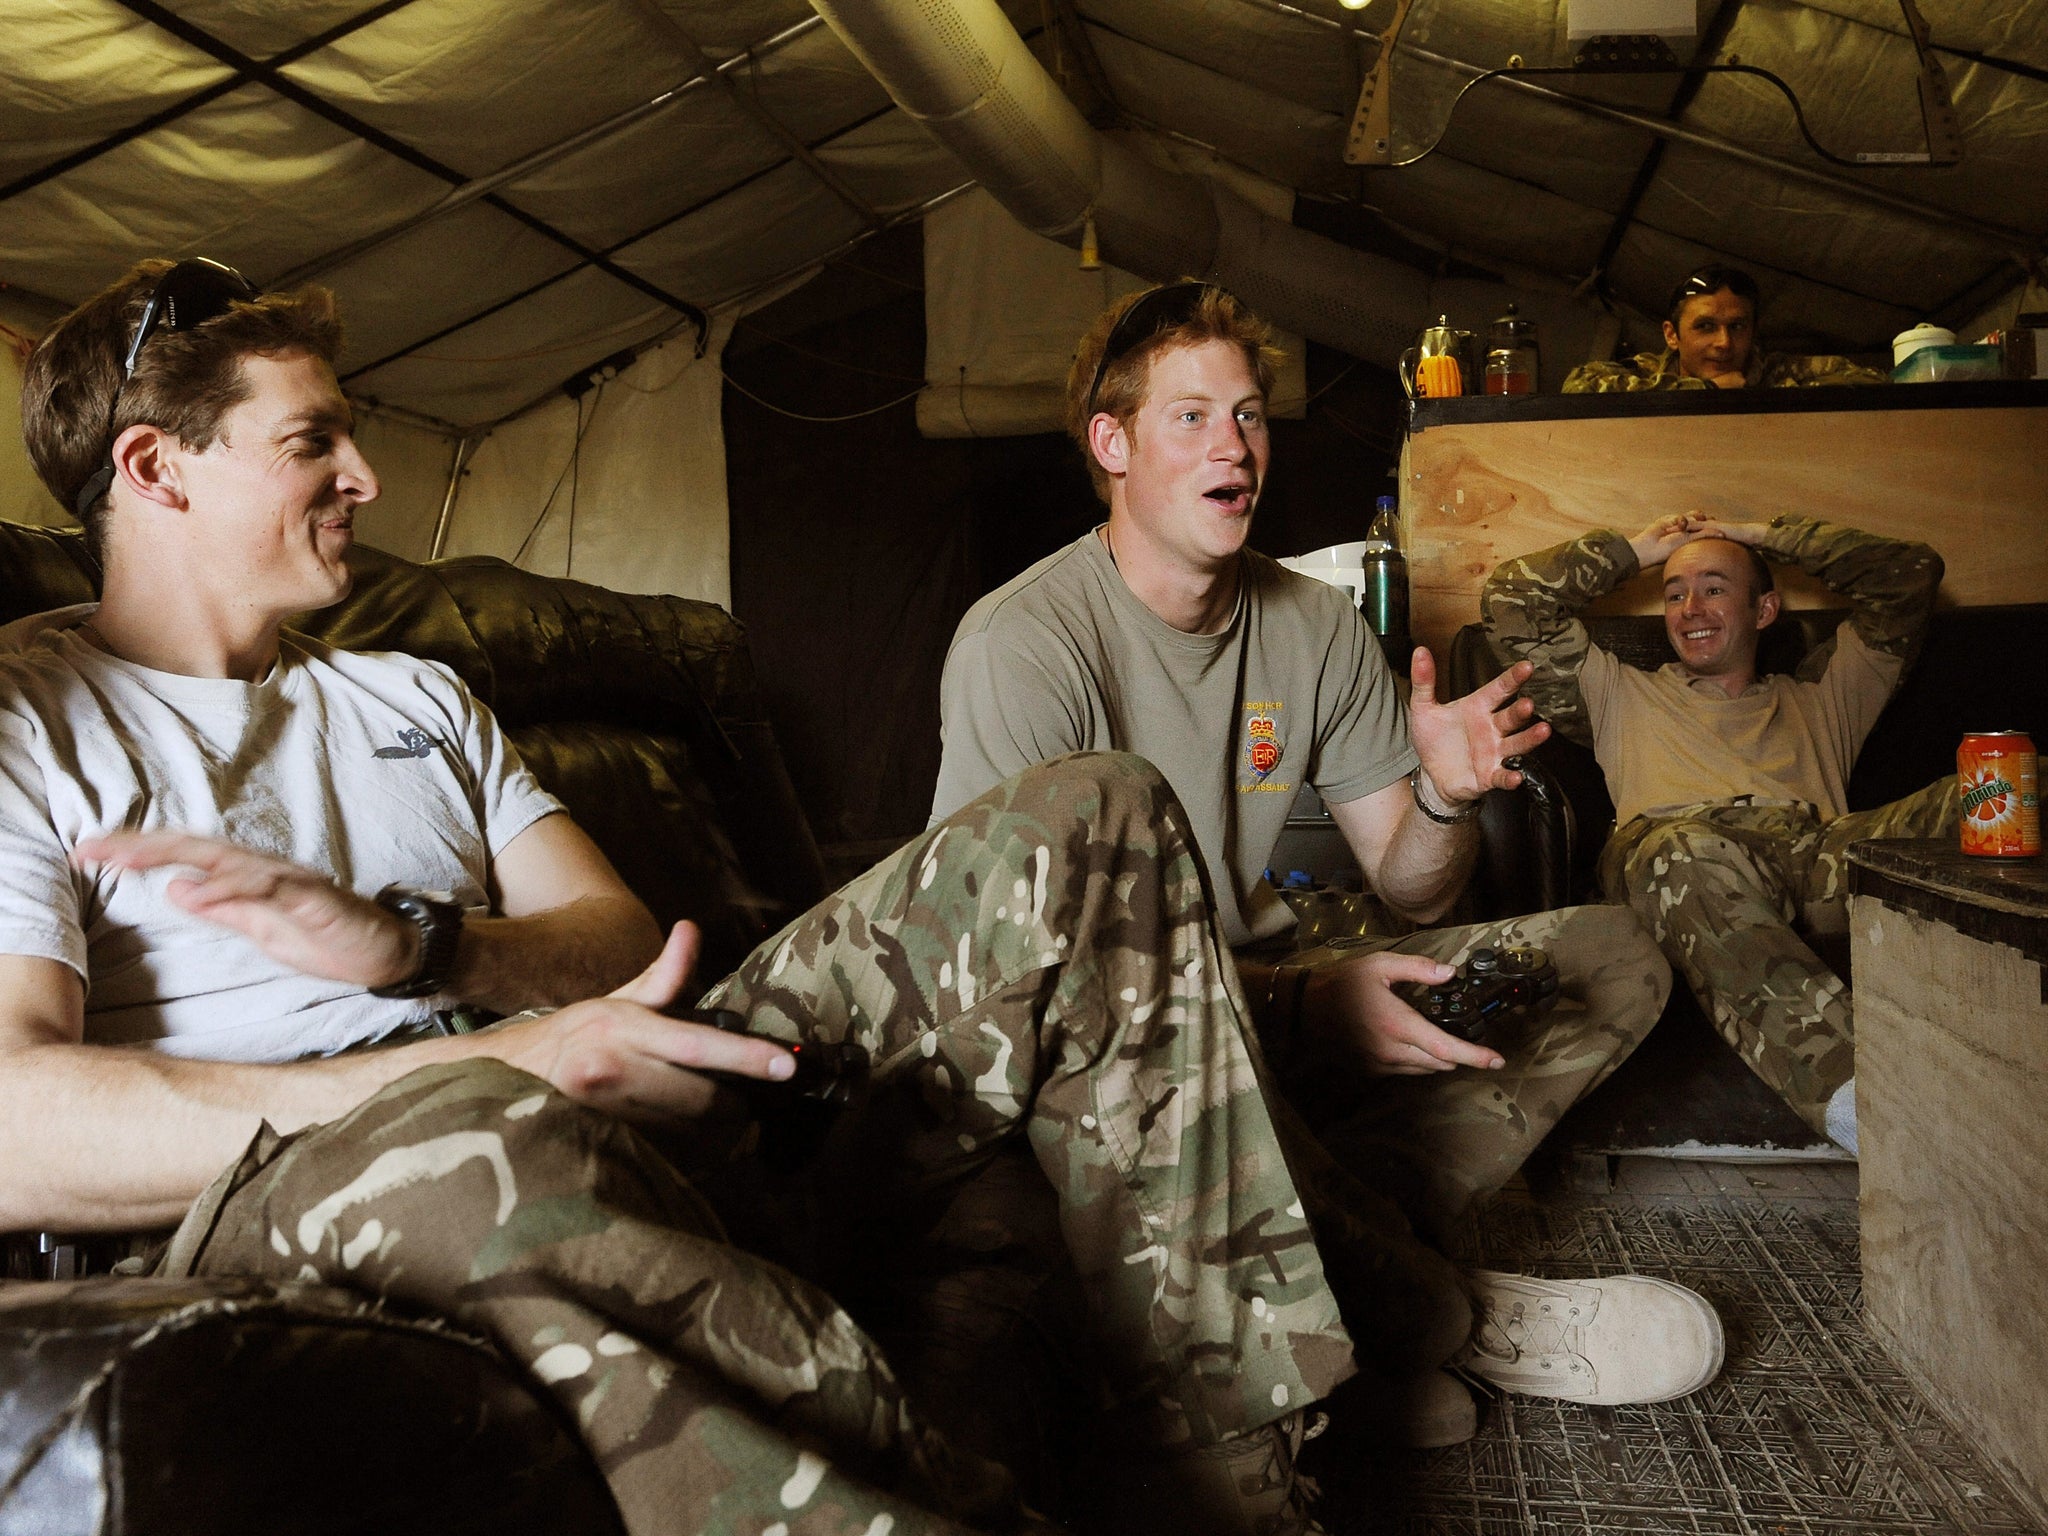 Prince Harry relaxes after scoring a goal during a computer football game with his fellow Apache Helicopter Pilot Capt Simon Beattie (left), during their 12 hour VHR (very high readiness) shift